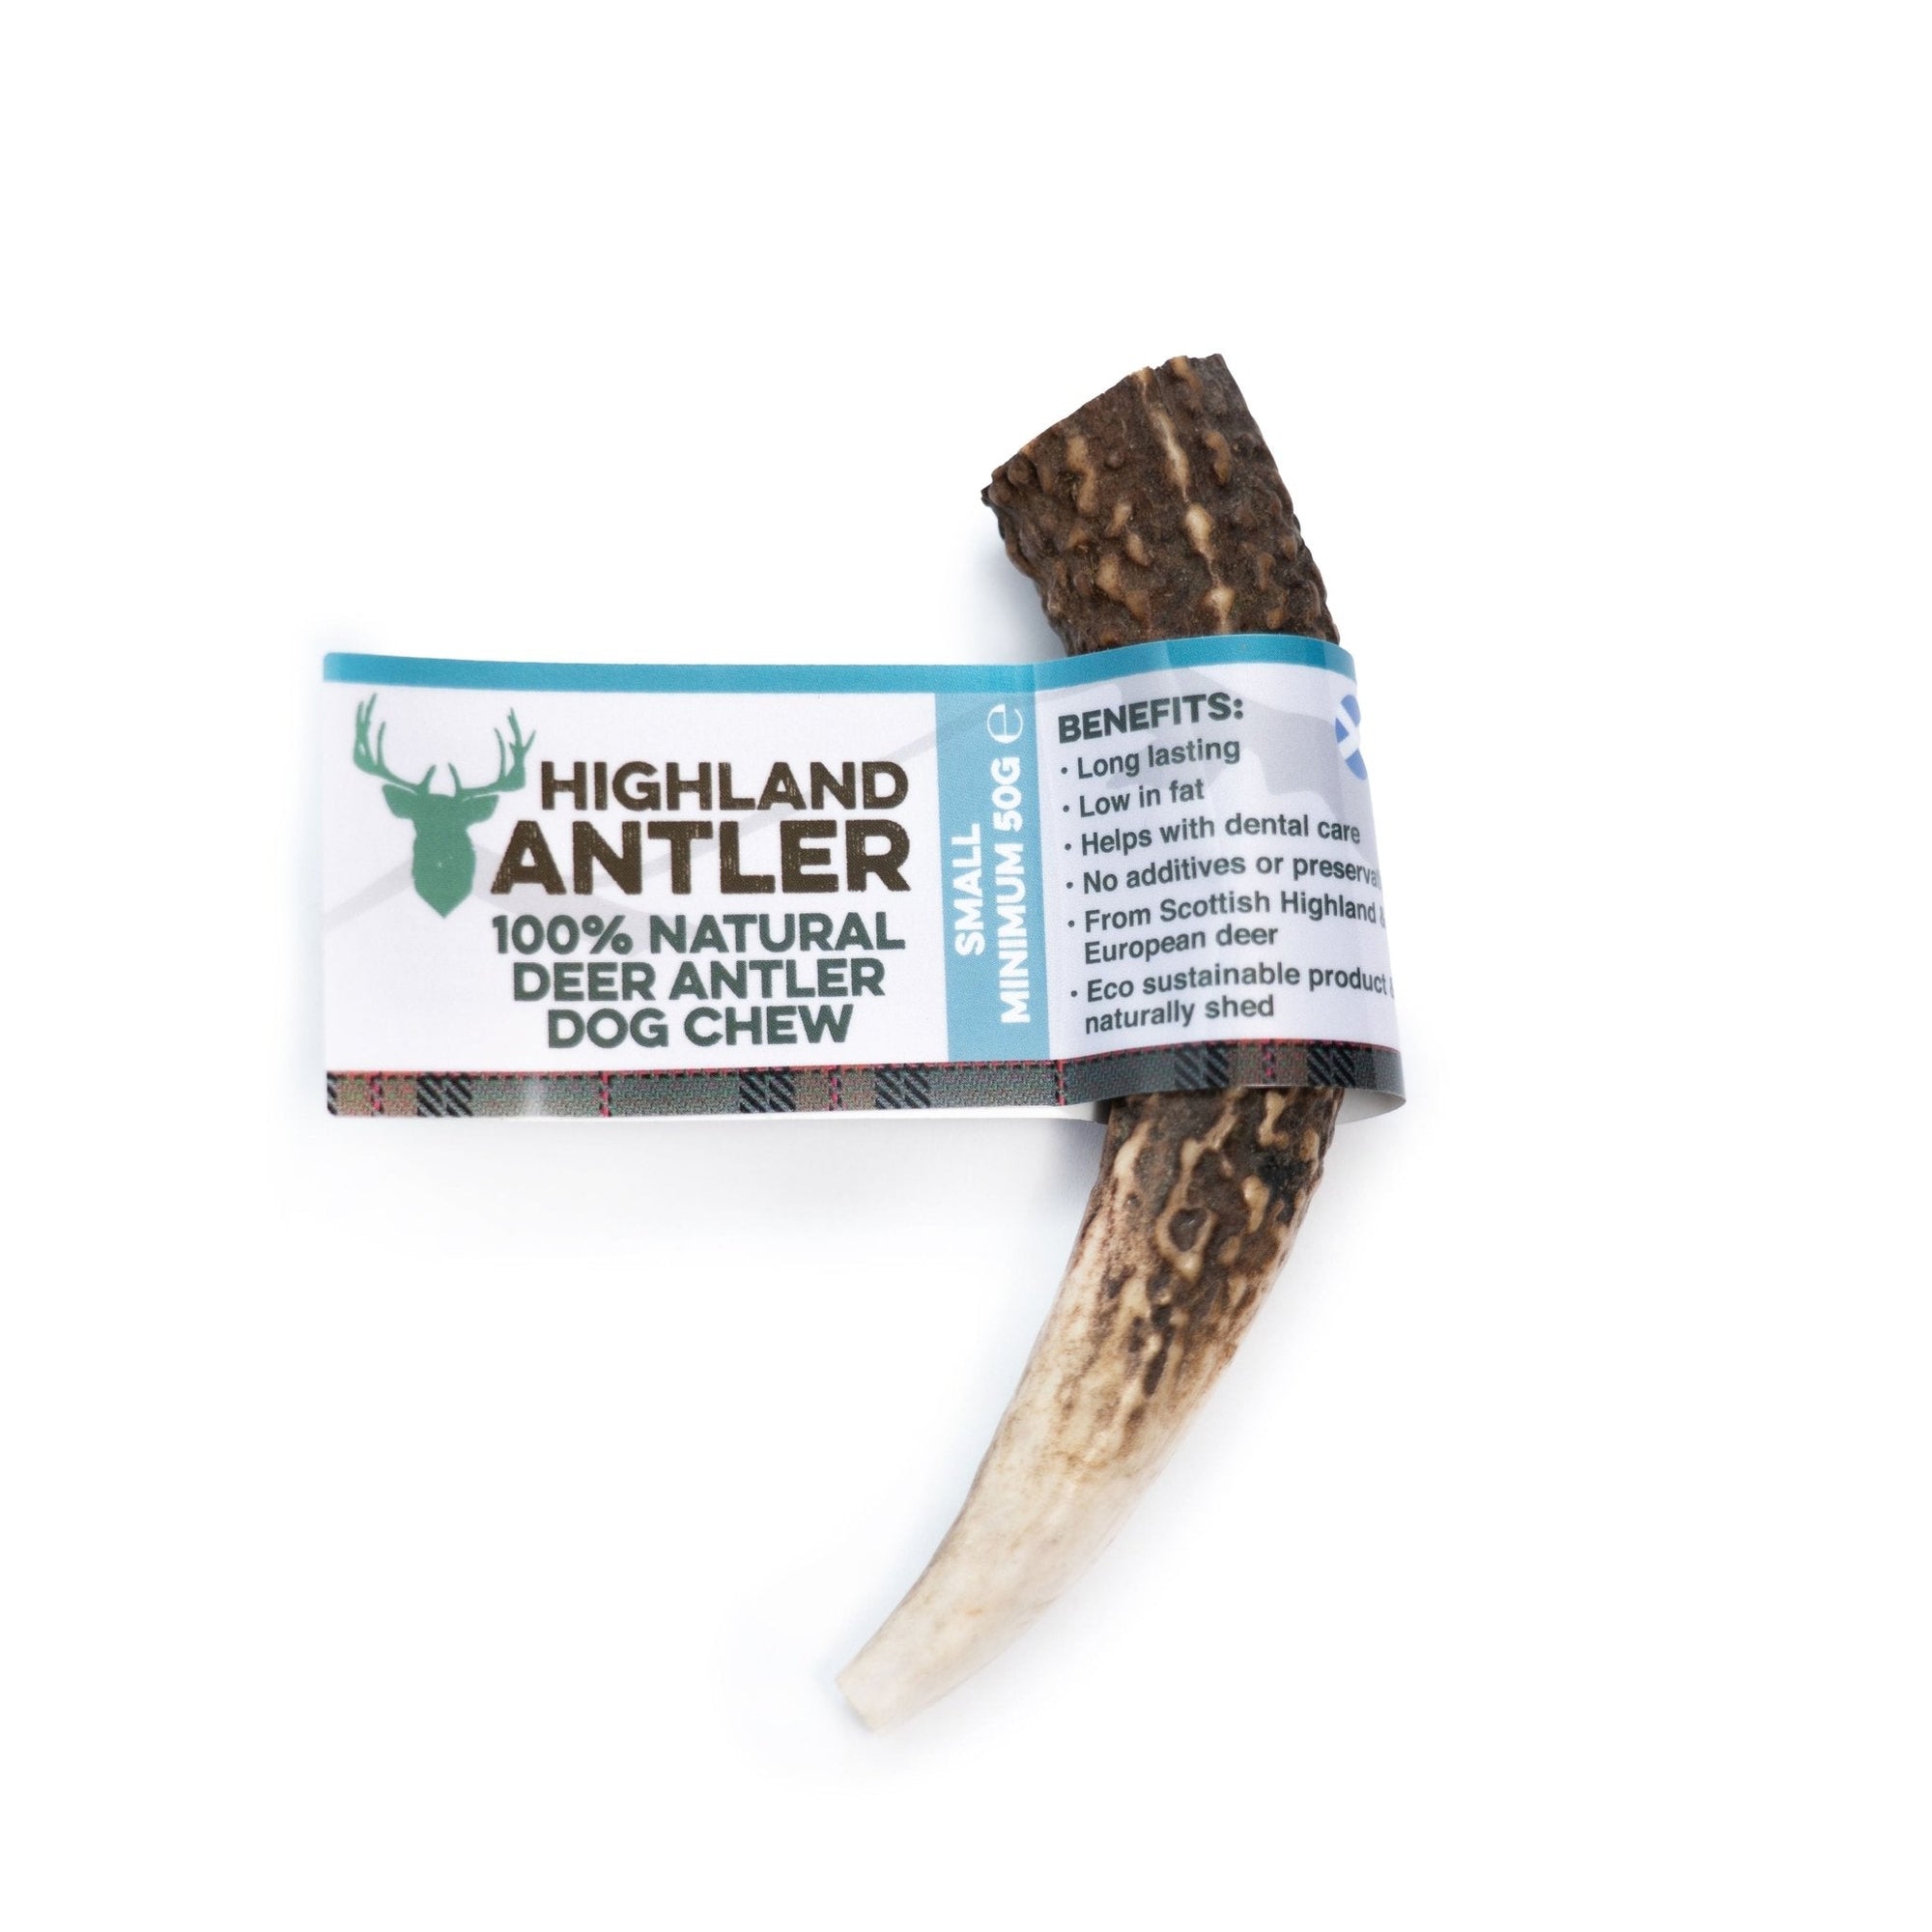 Picture of a Highland Antler natural dog chew. Natural chews link